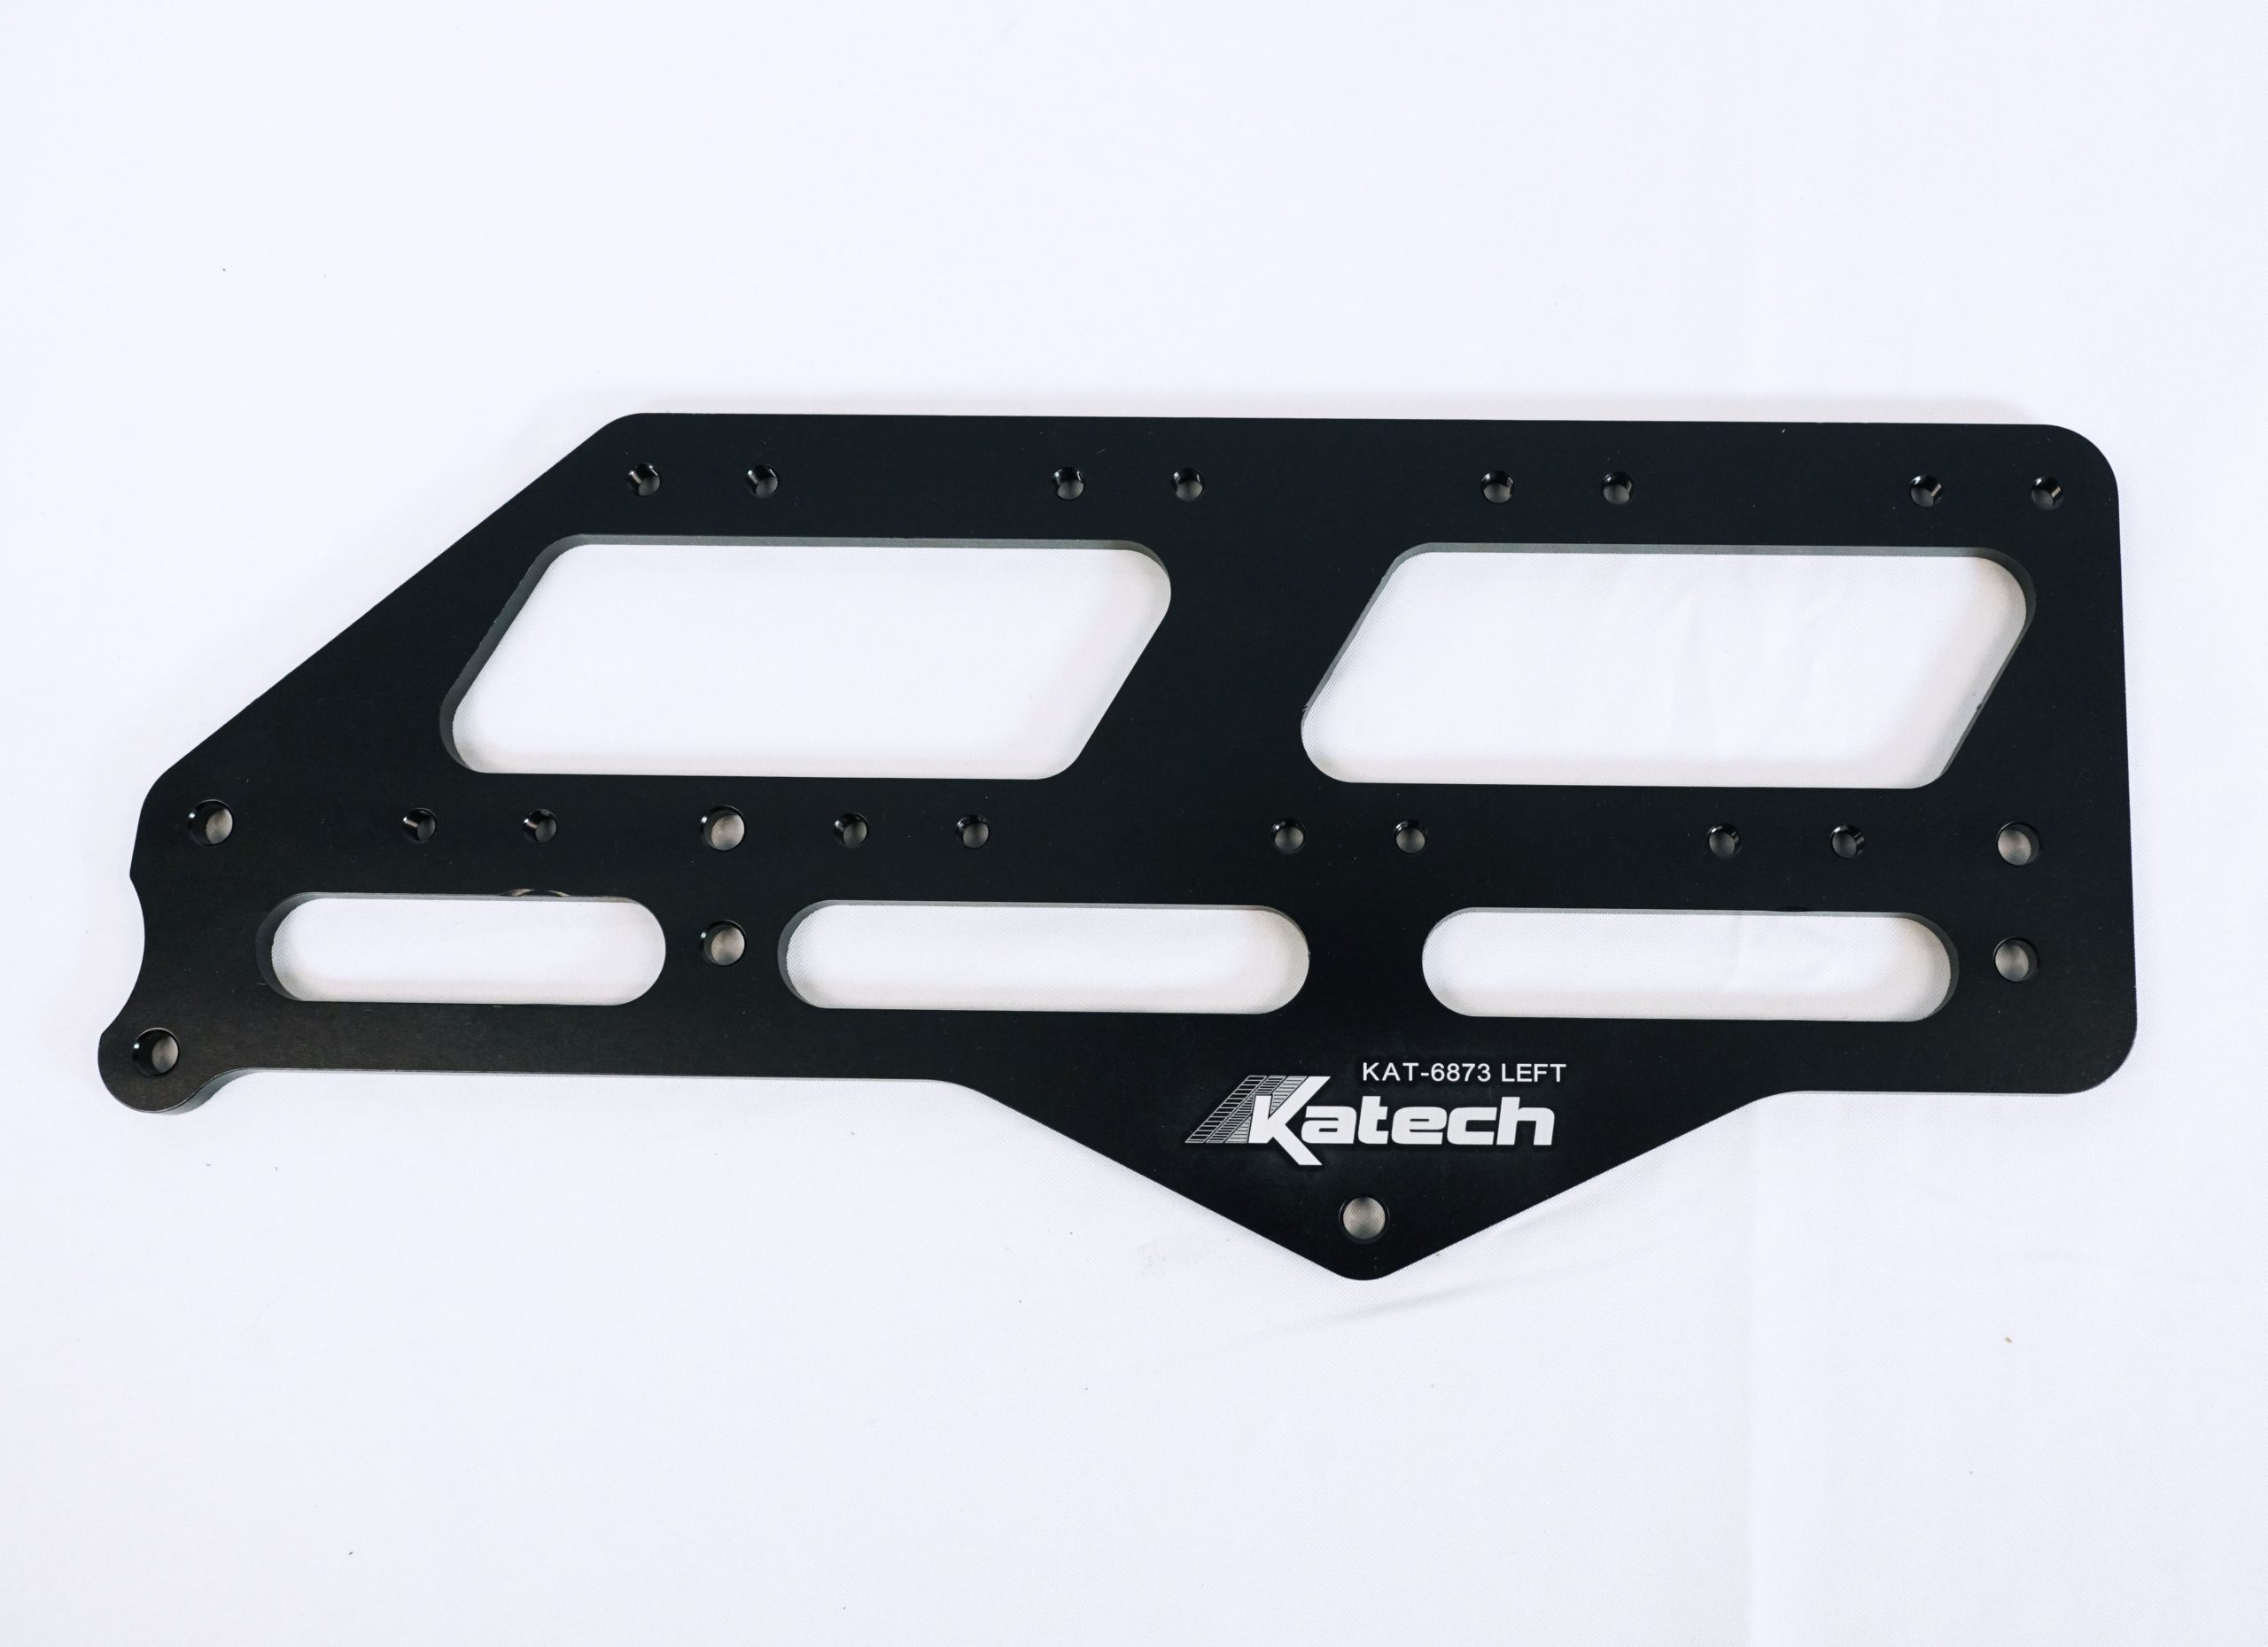 TA2 Coil Bracket Kit (round) For TA2 engines, KAT-A6874